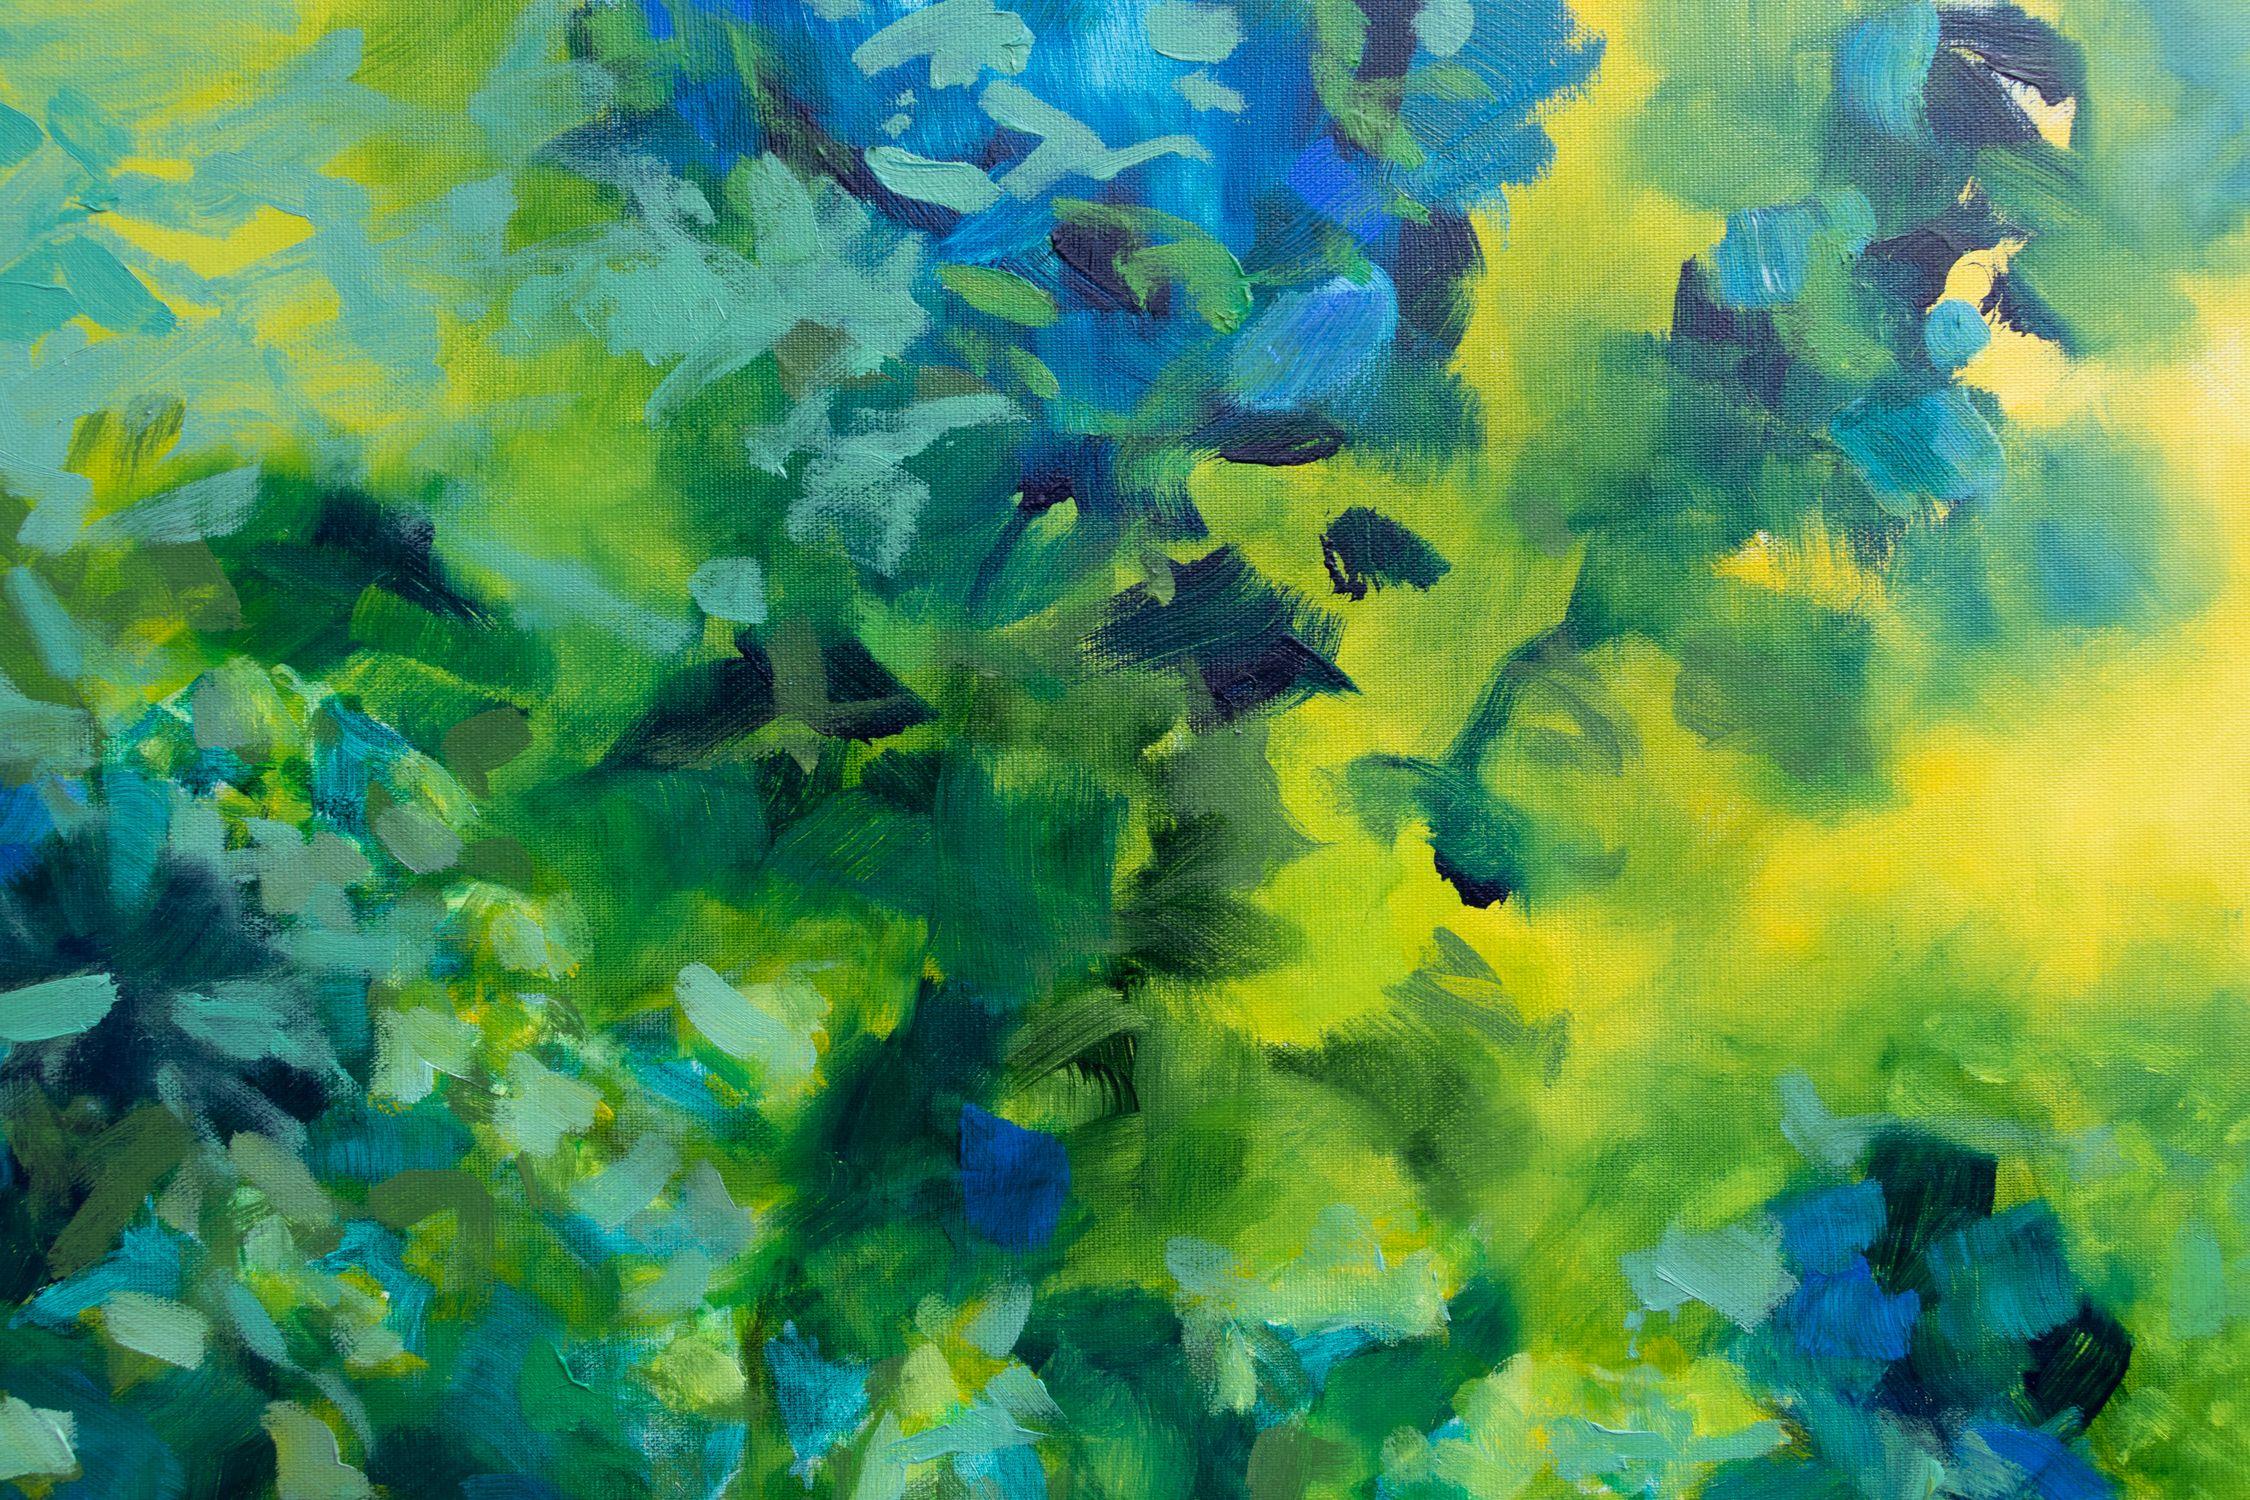 Garden's corner in yellow, green and blue, Painting, Oil on Canvas 2